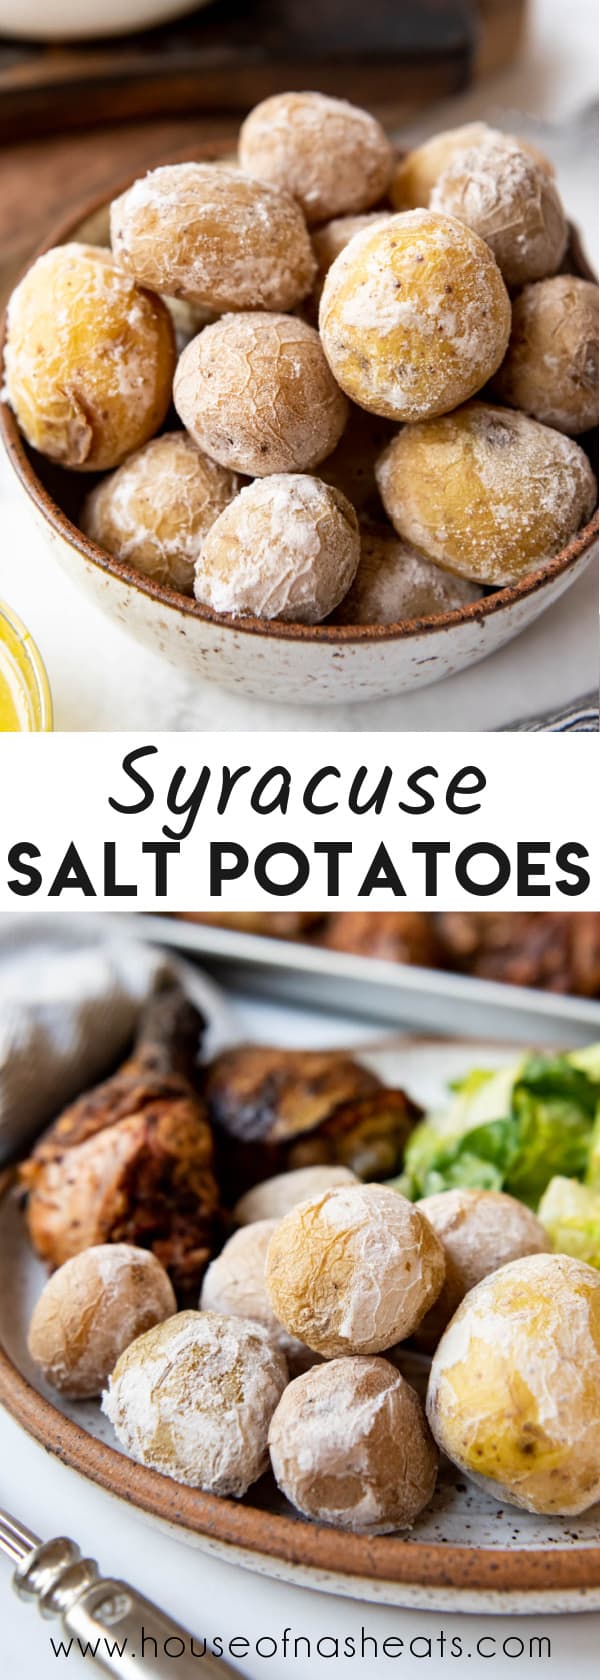 A collage of images of syracuse salt potatoes with text overlay.